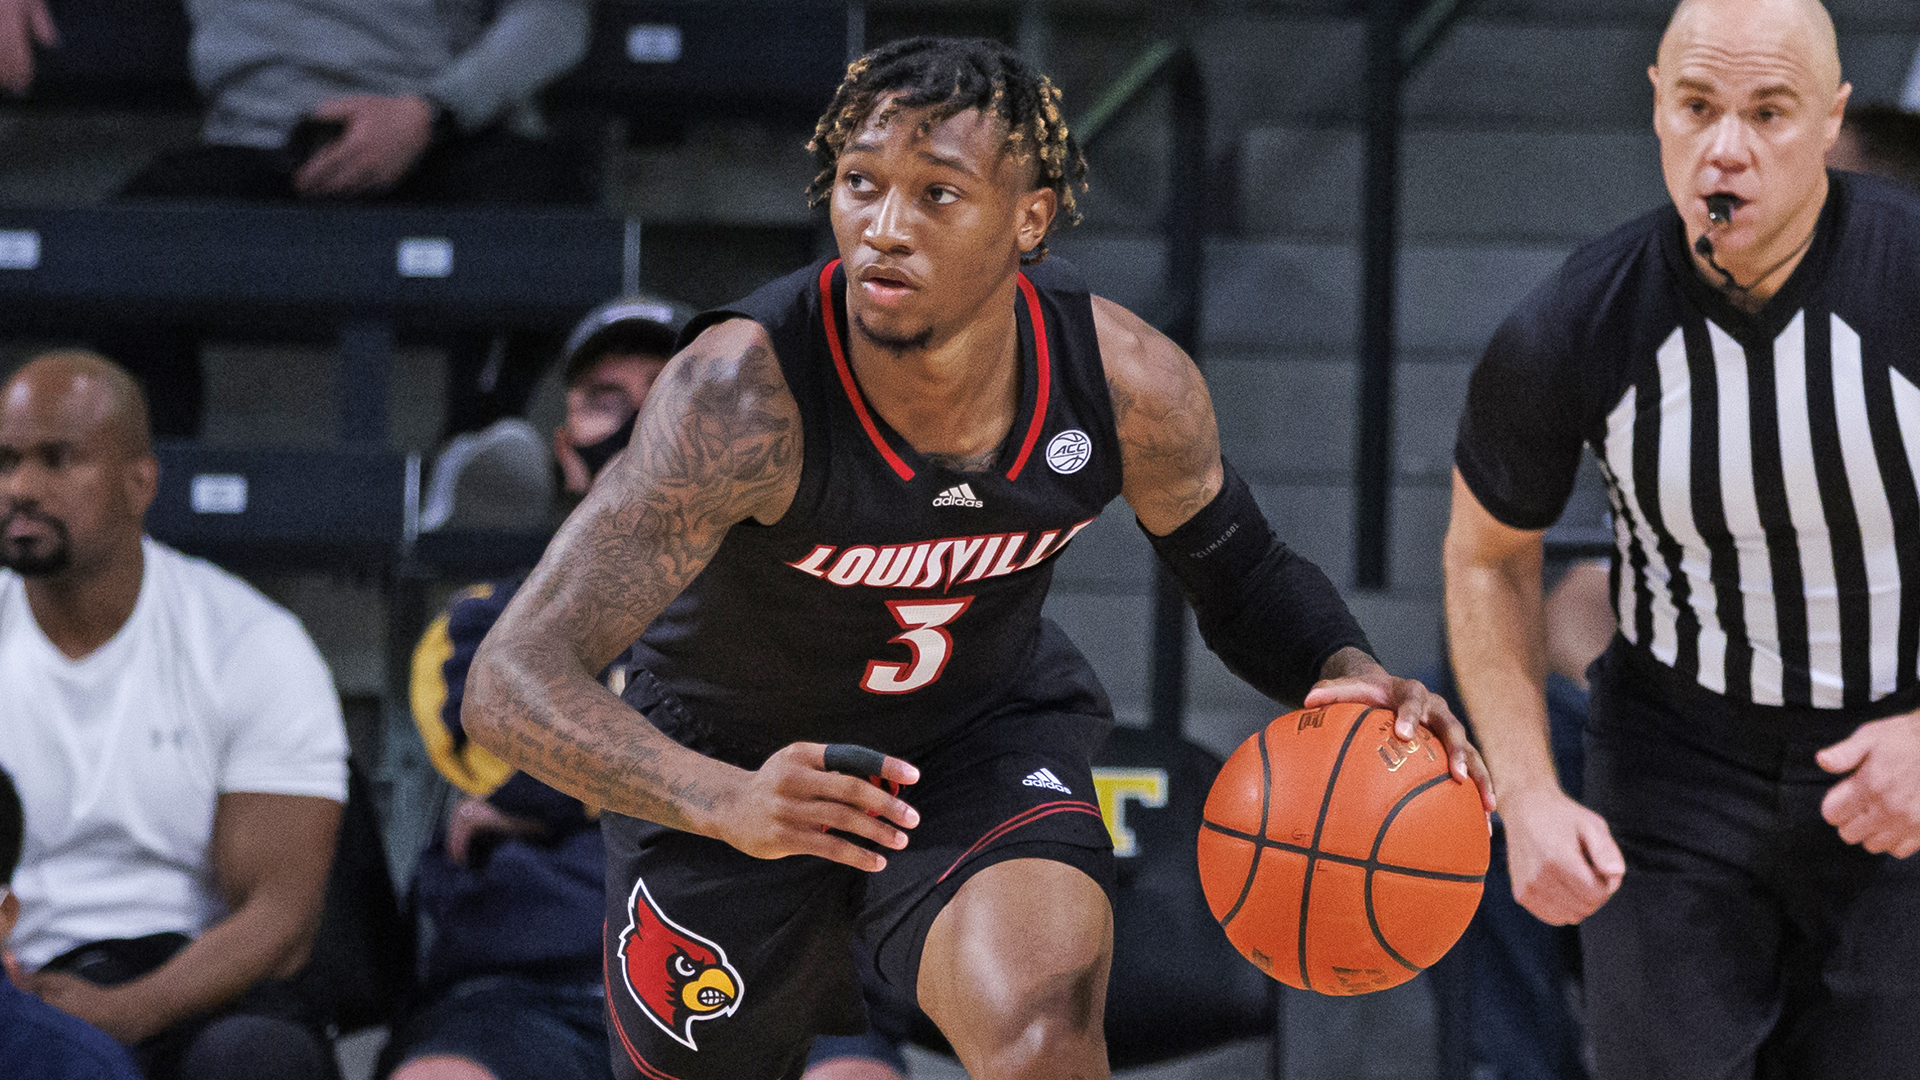 Louisville Basketball Roster: Should I Stay or Should I Go? - Belly Up ...